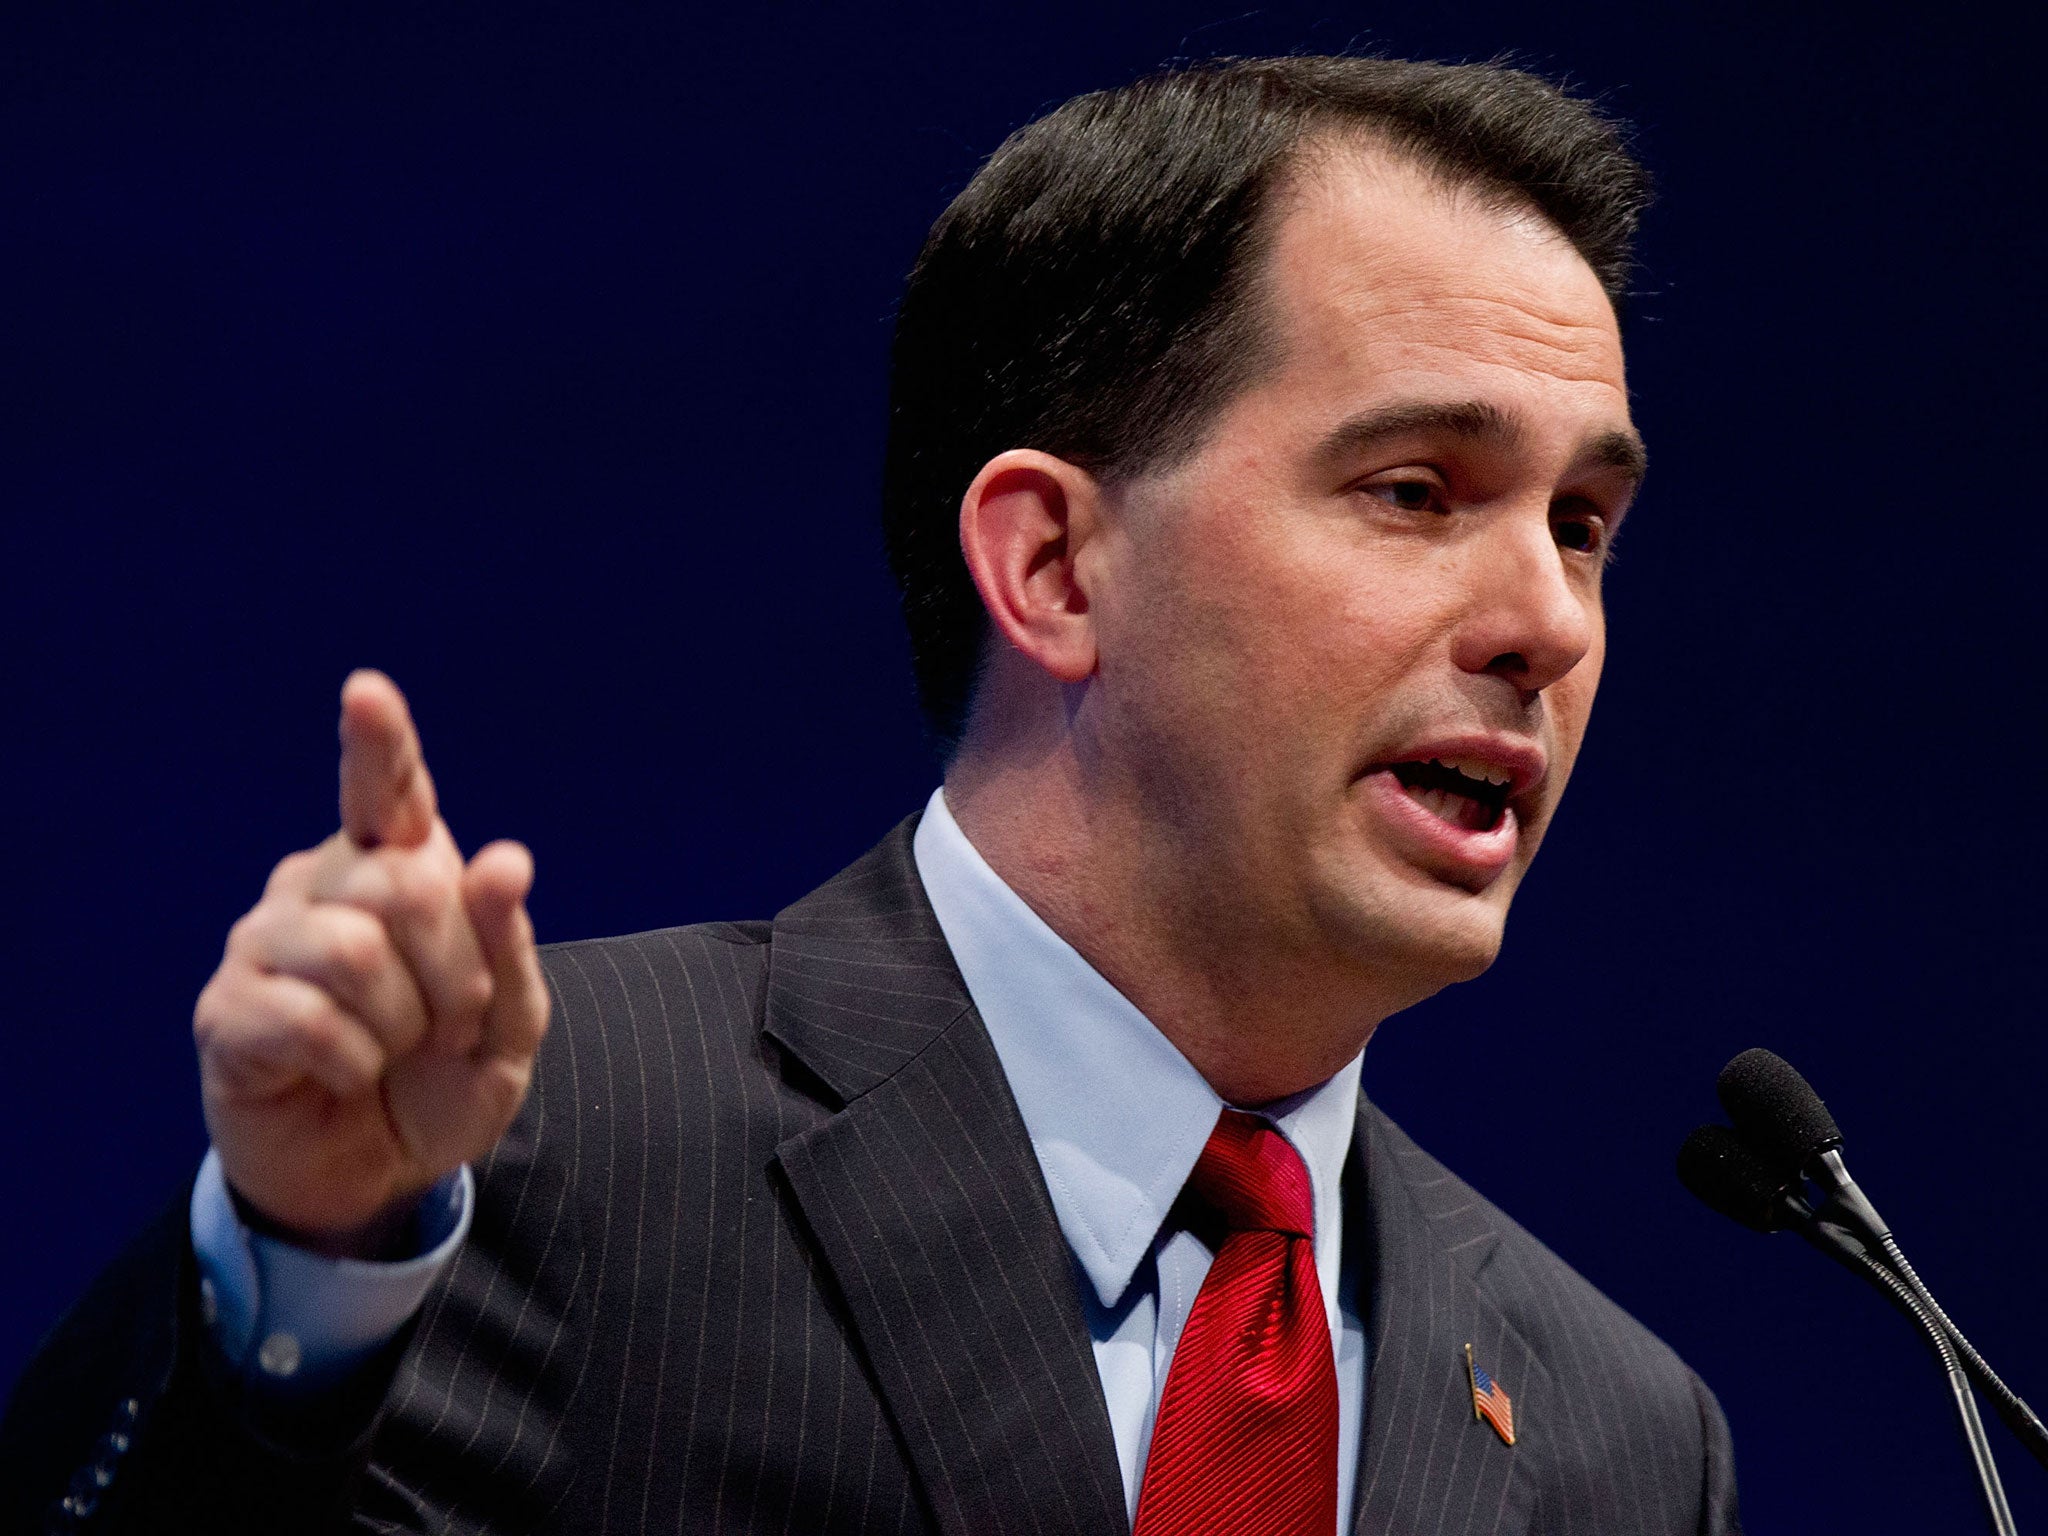 Scott Walker has not issued any pardons during his time as Governor of Wisconsin